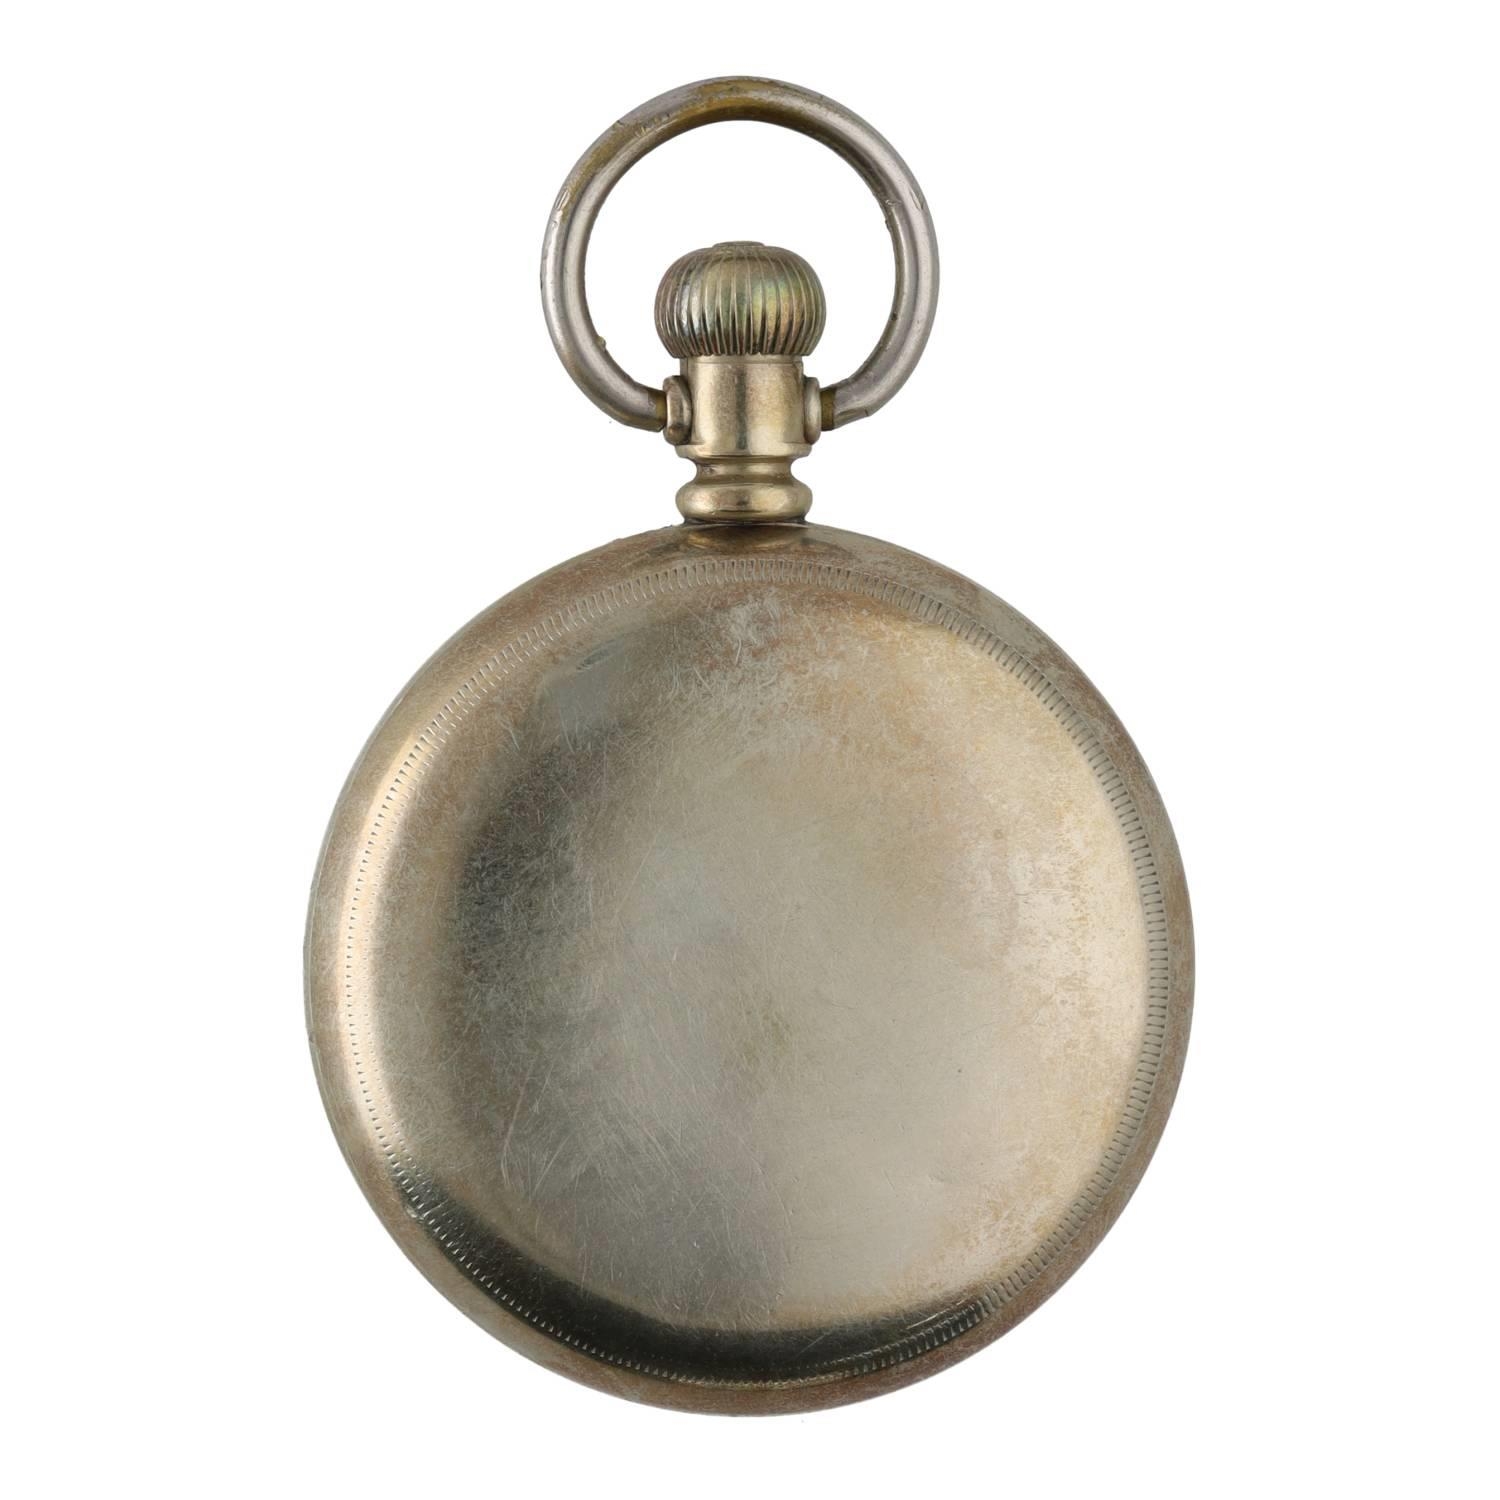 Elgin National Watch Co. lever set nickel cased pocket watch, circa 1891, serial no. 4470680, signed - Image 3 of 3